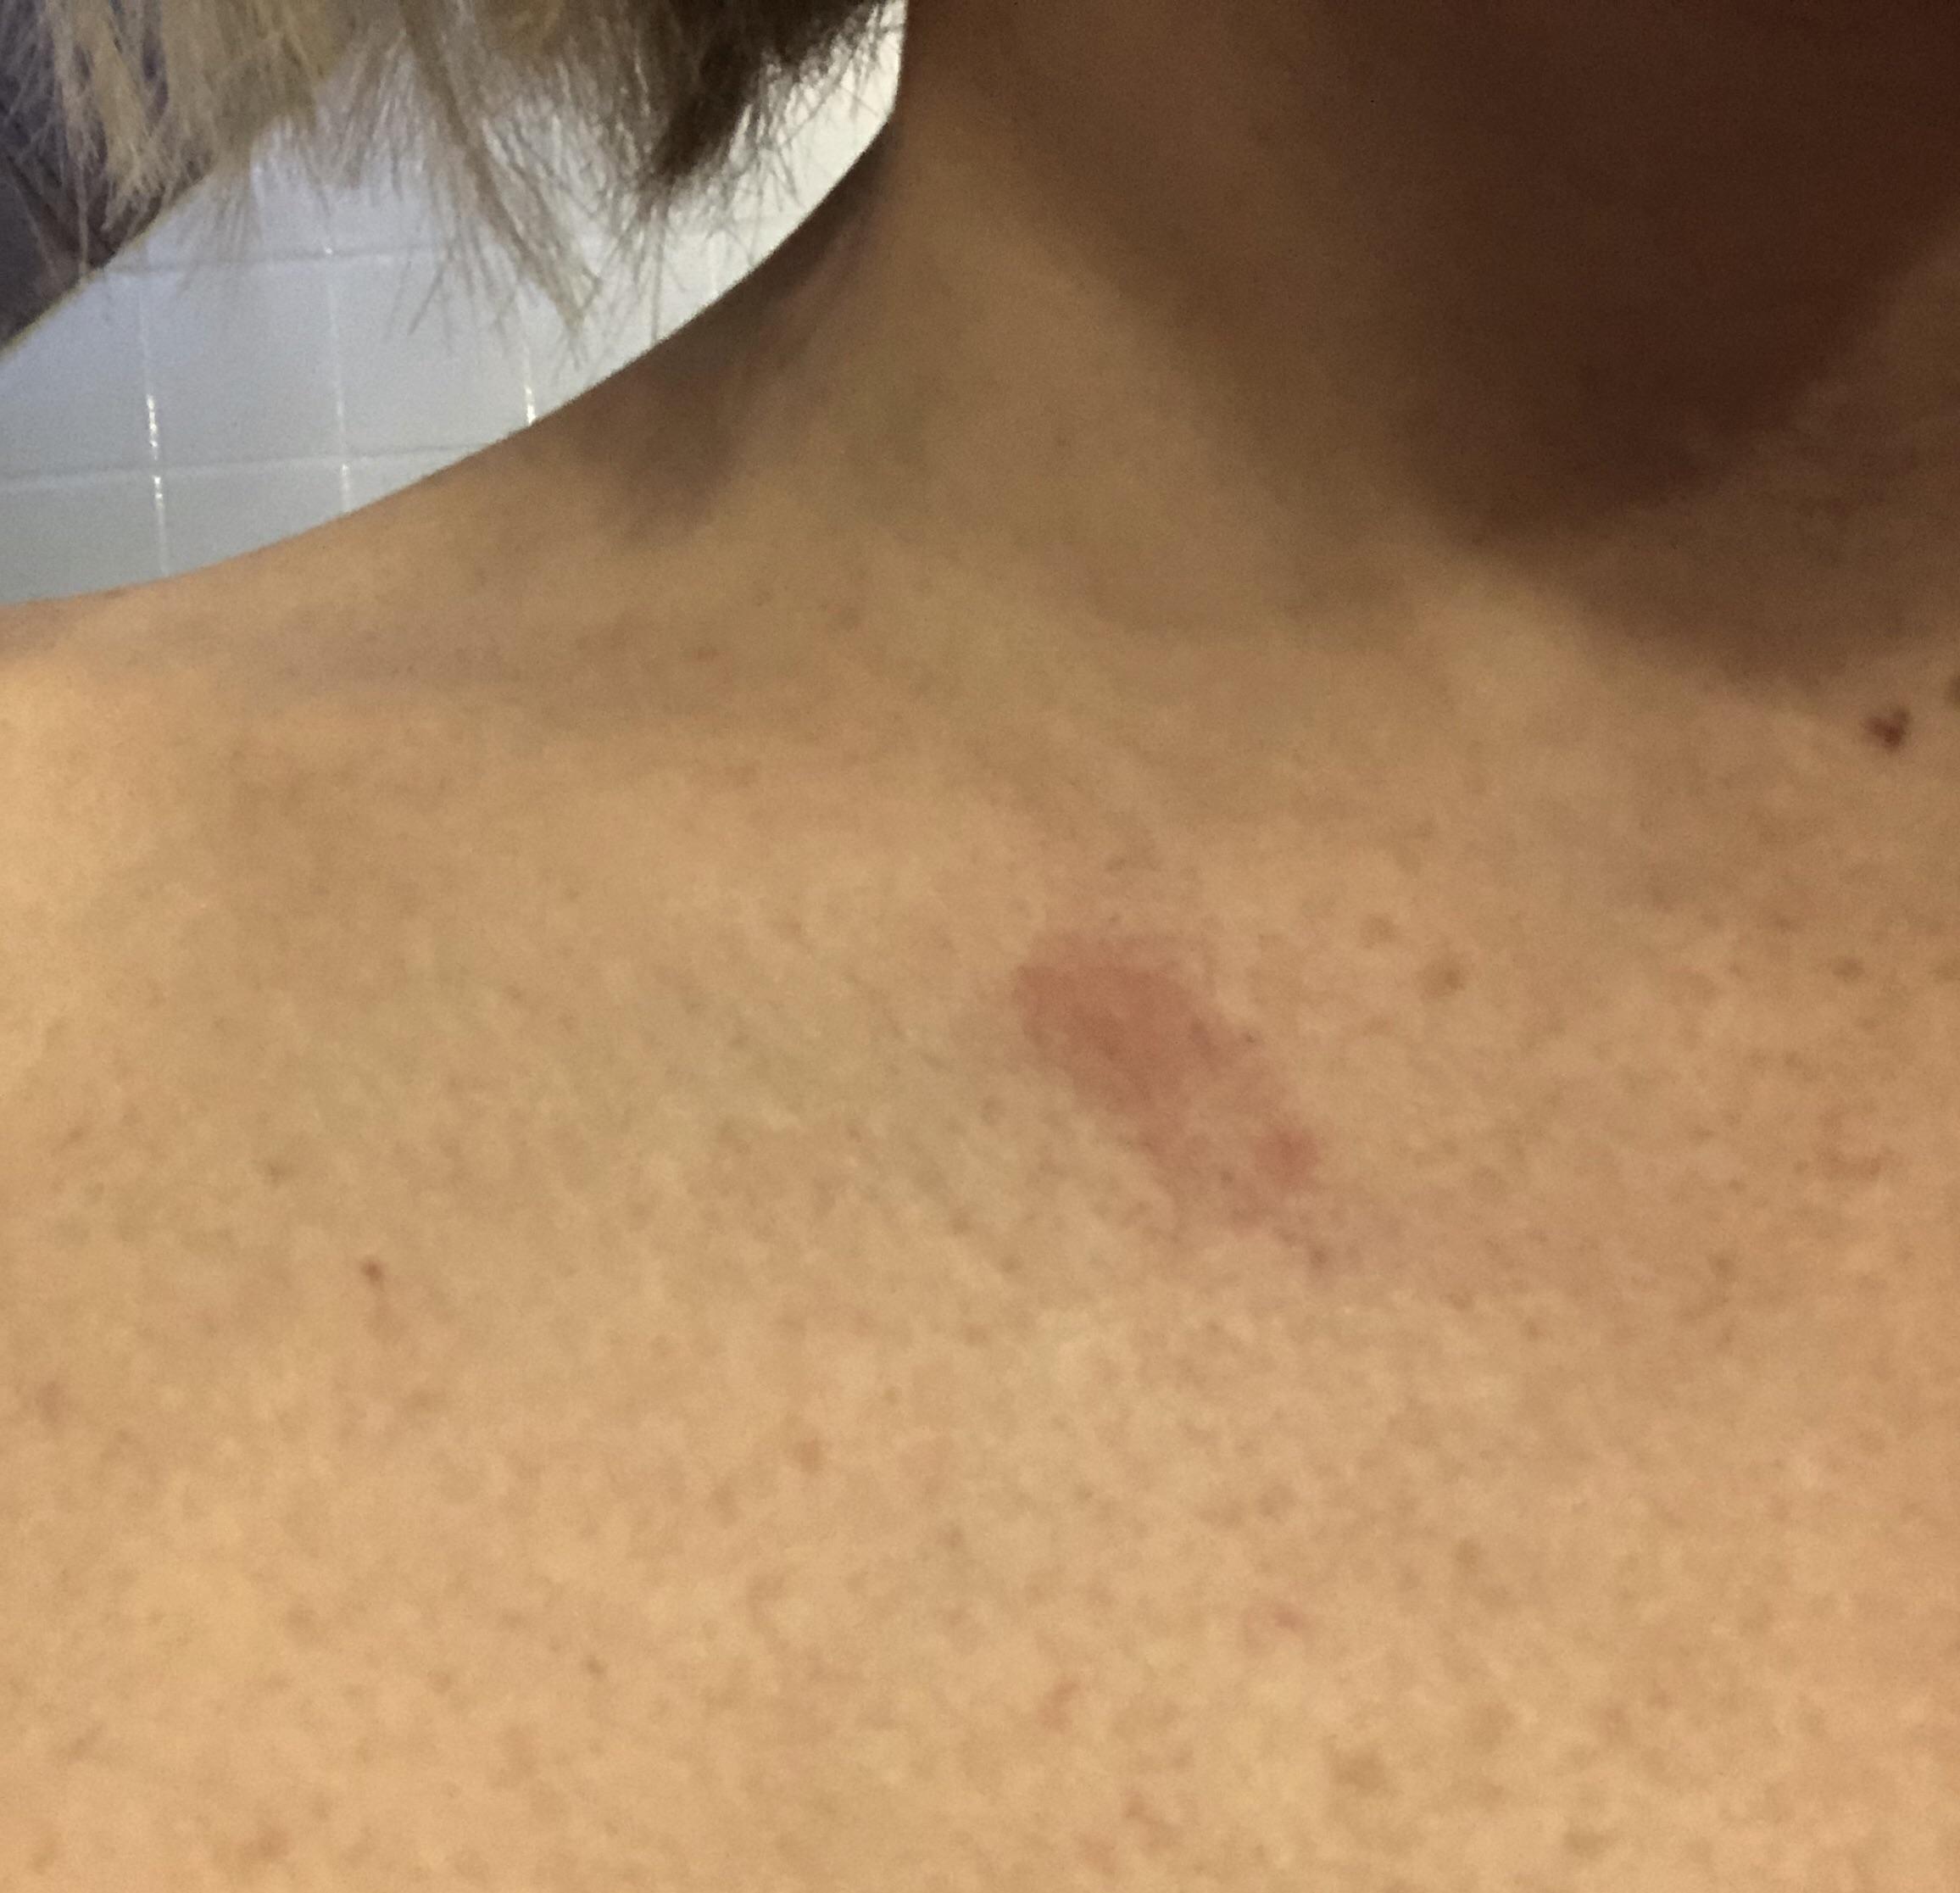 Ive been getting these itchy, inflamed red marks for a few weeks. I ...